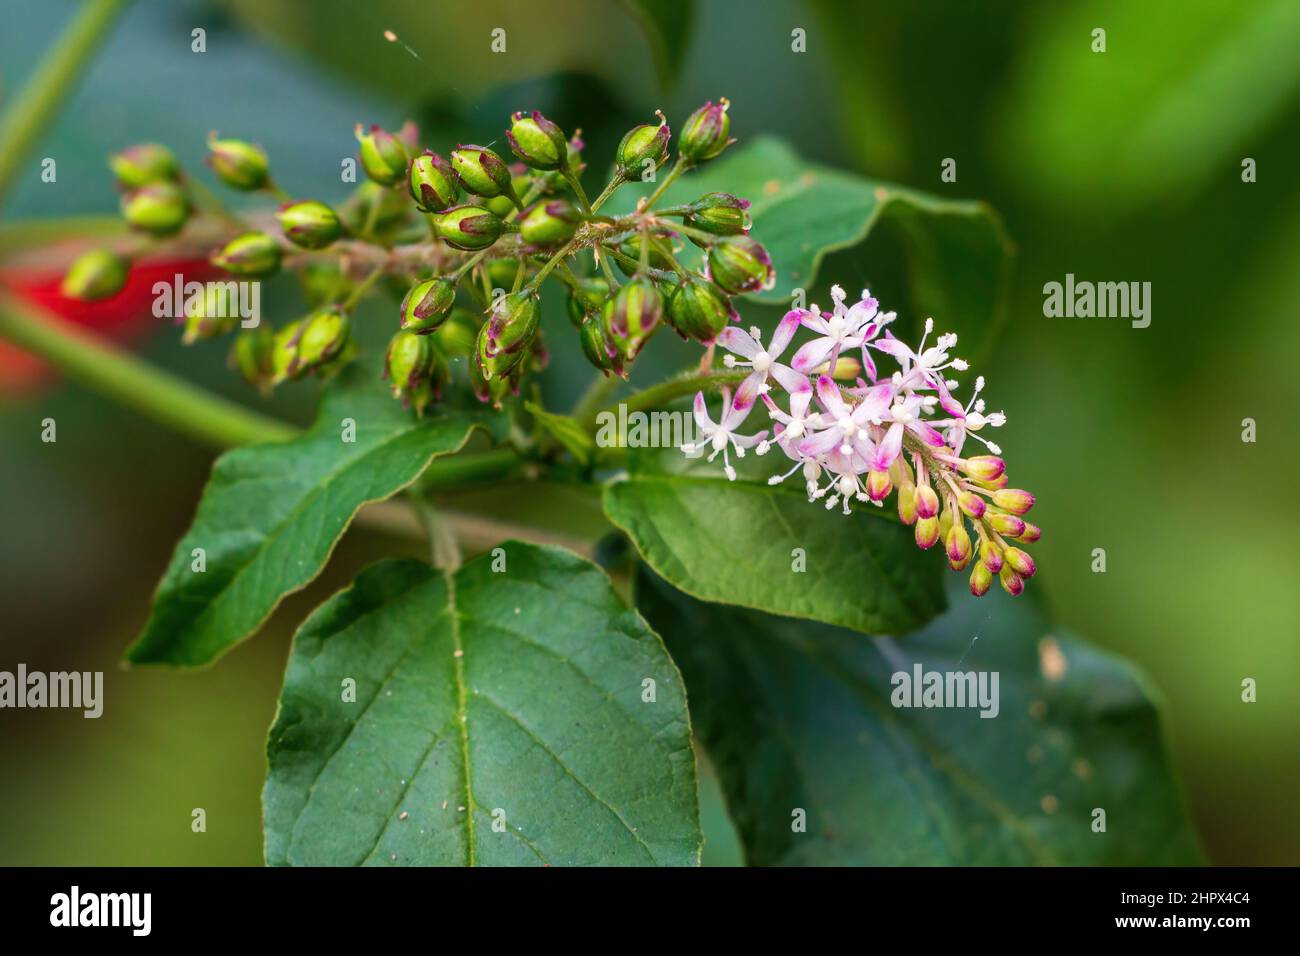 Flowers of pigeonberry a.k.a. bloodberry or rougeplant (Rivina humilis) - Davie, Florida, USA Stock Photo